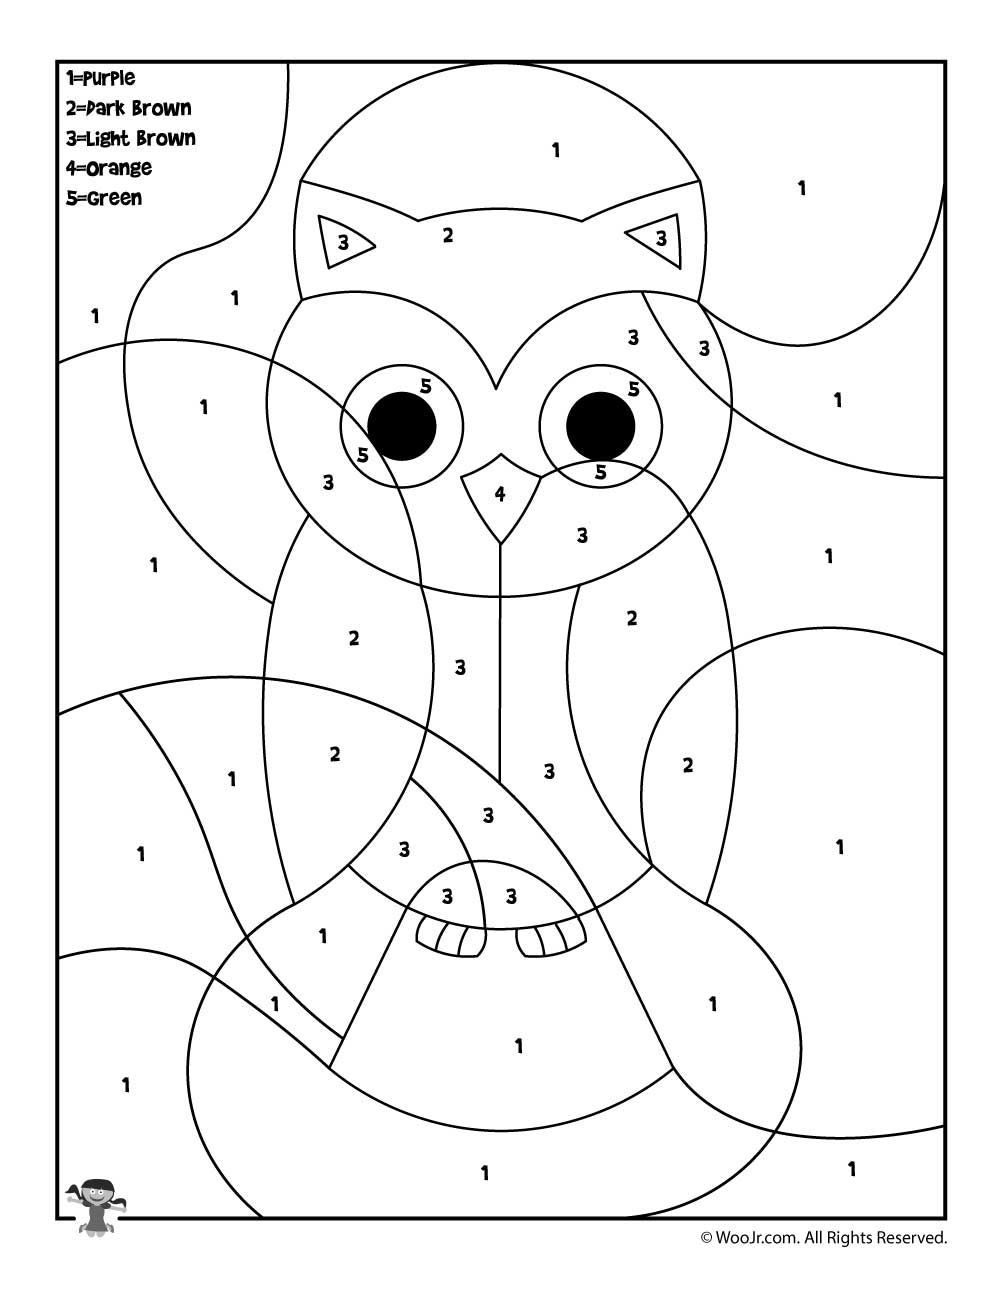 Preschool Color By Number Animal Coloring Pages -   24 owl crafts kindergarten
 ideas